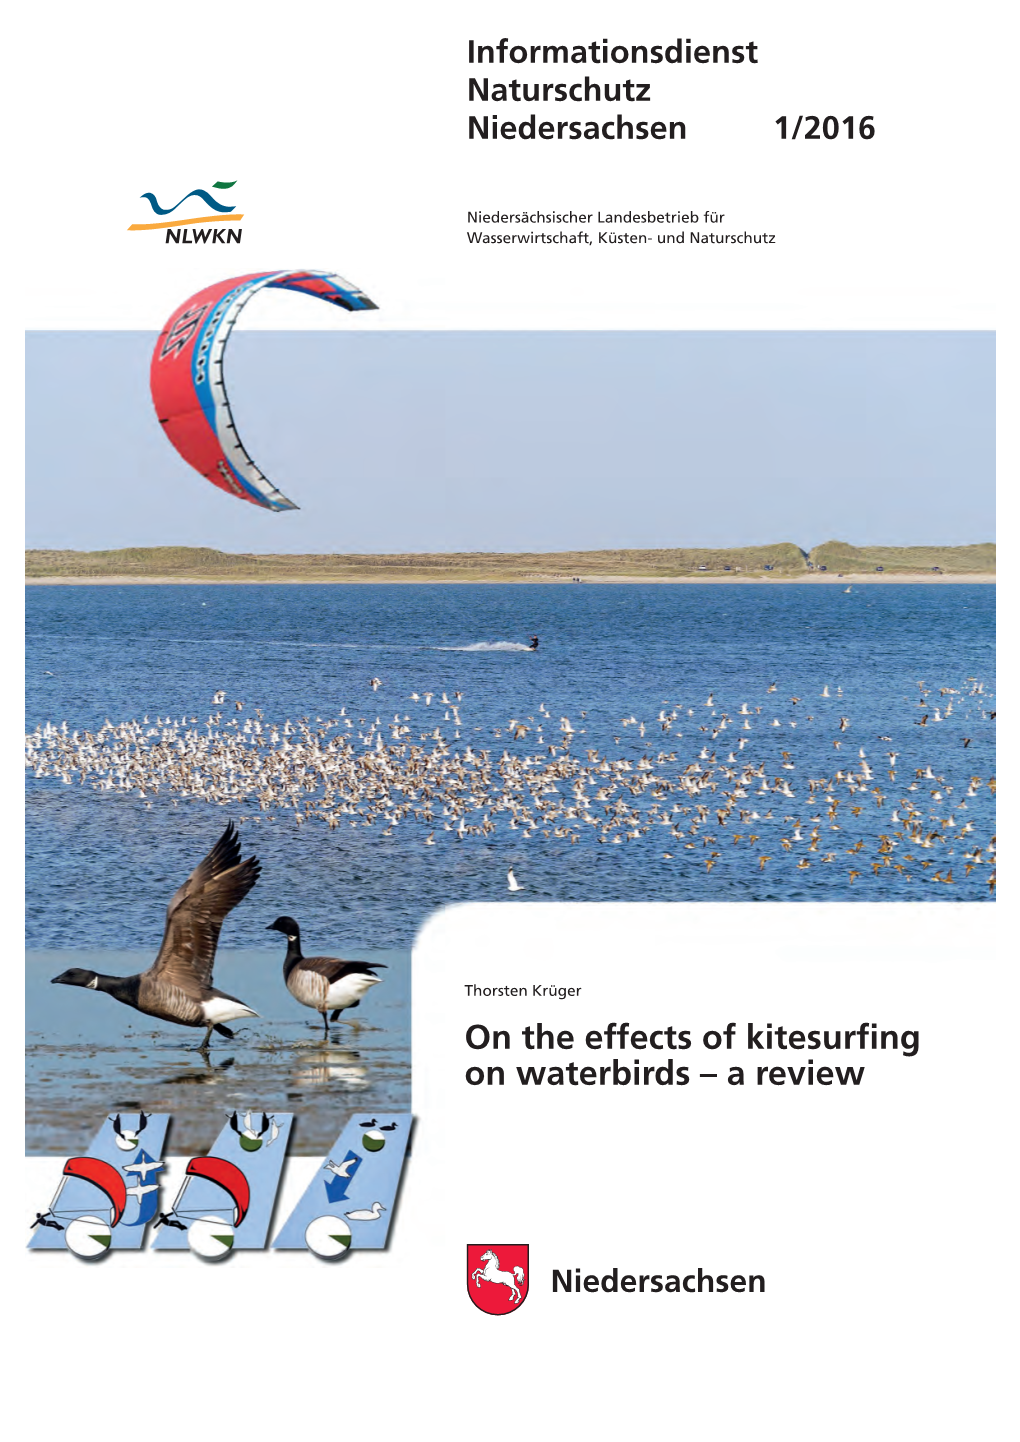 On the Effects of Kitesurfing on Waterbirds – a Review